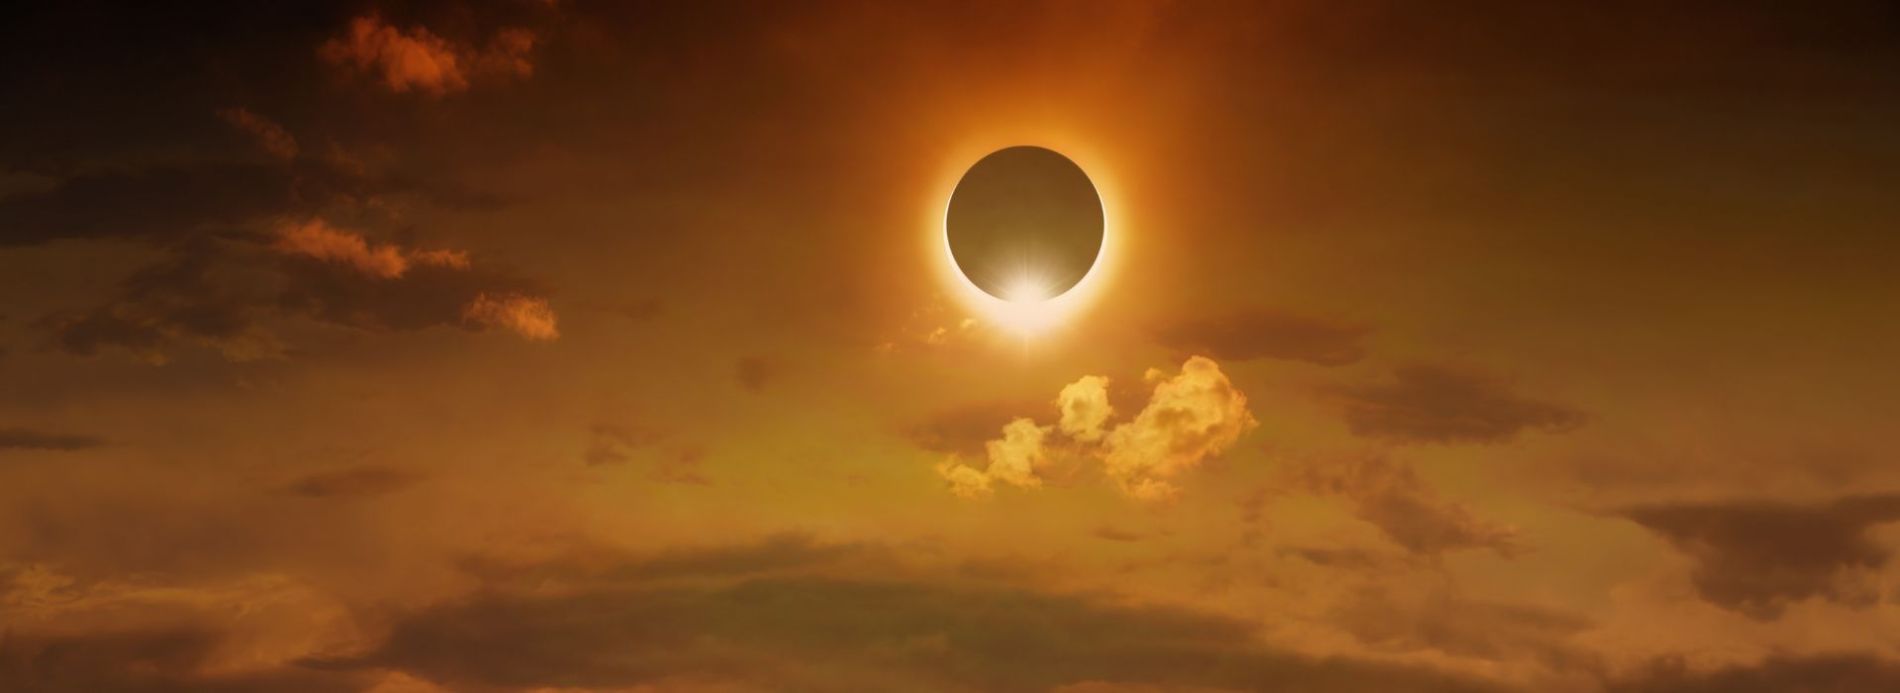 eclipse of the sun